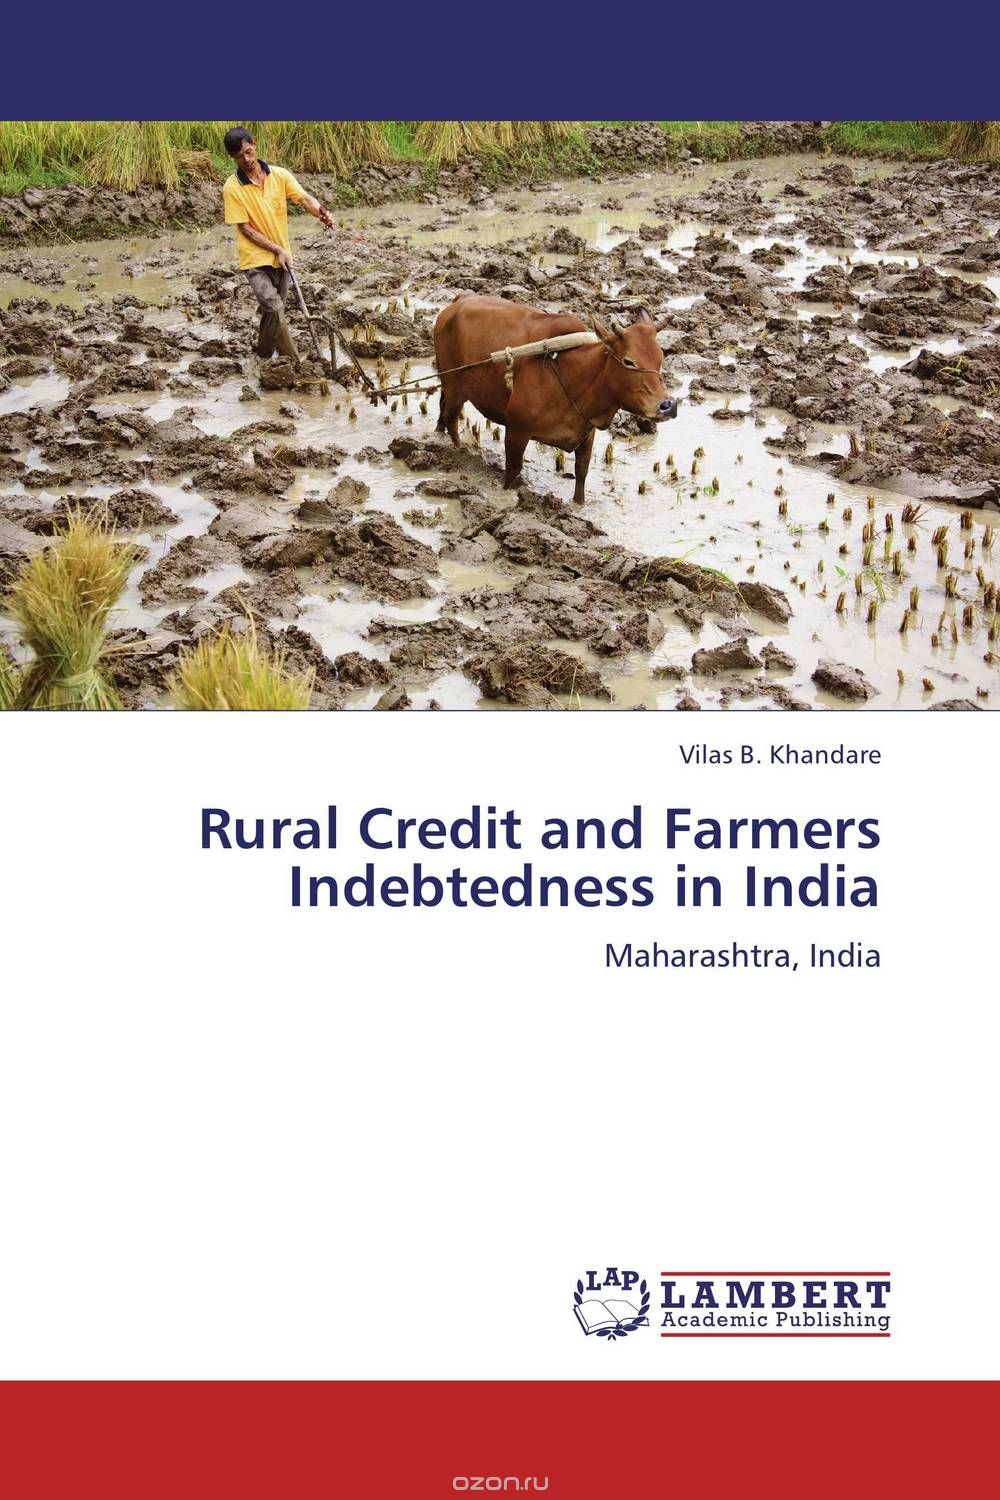 Скачать книгу "Rural Credit and Farmers Indebtedness in India"